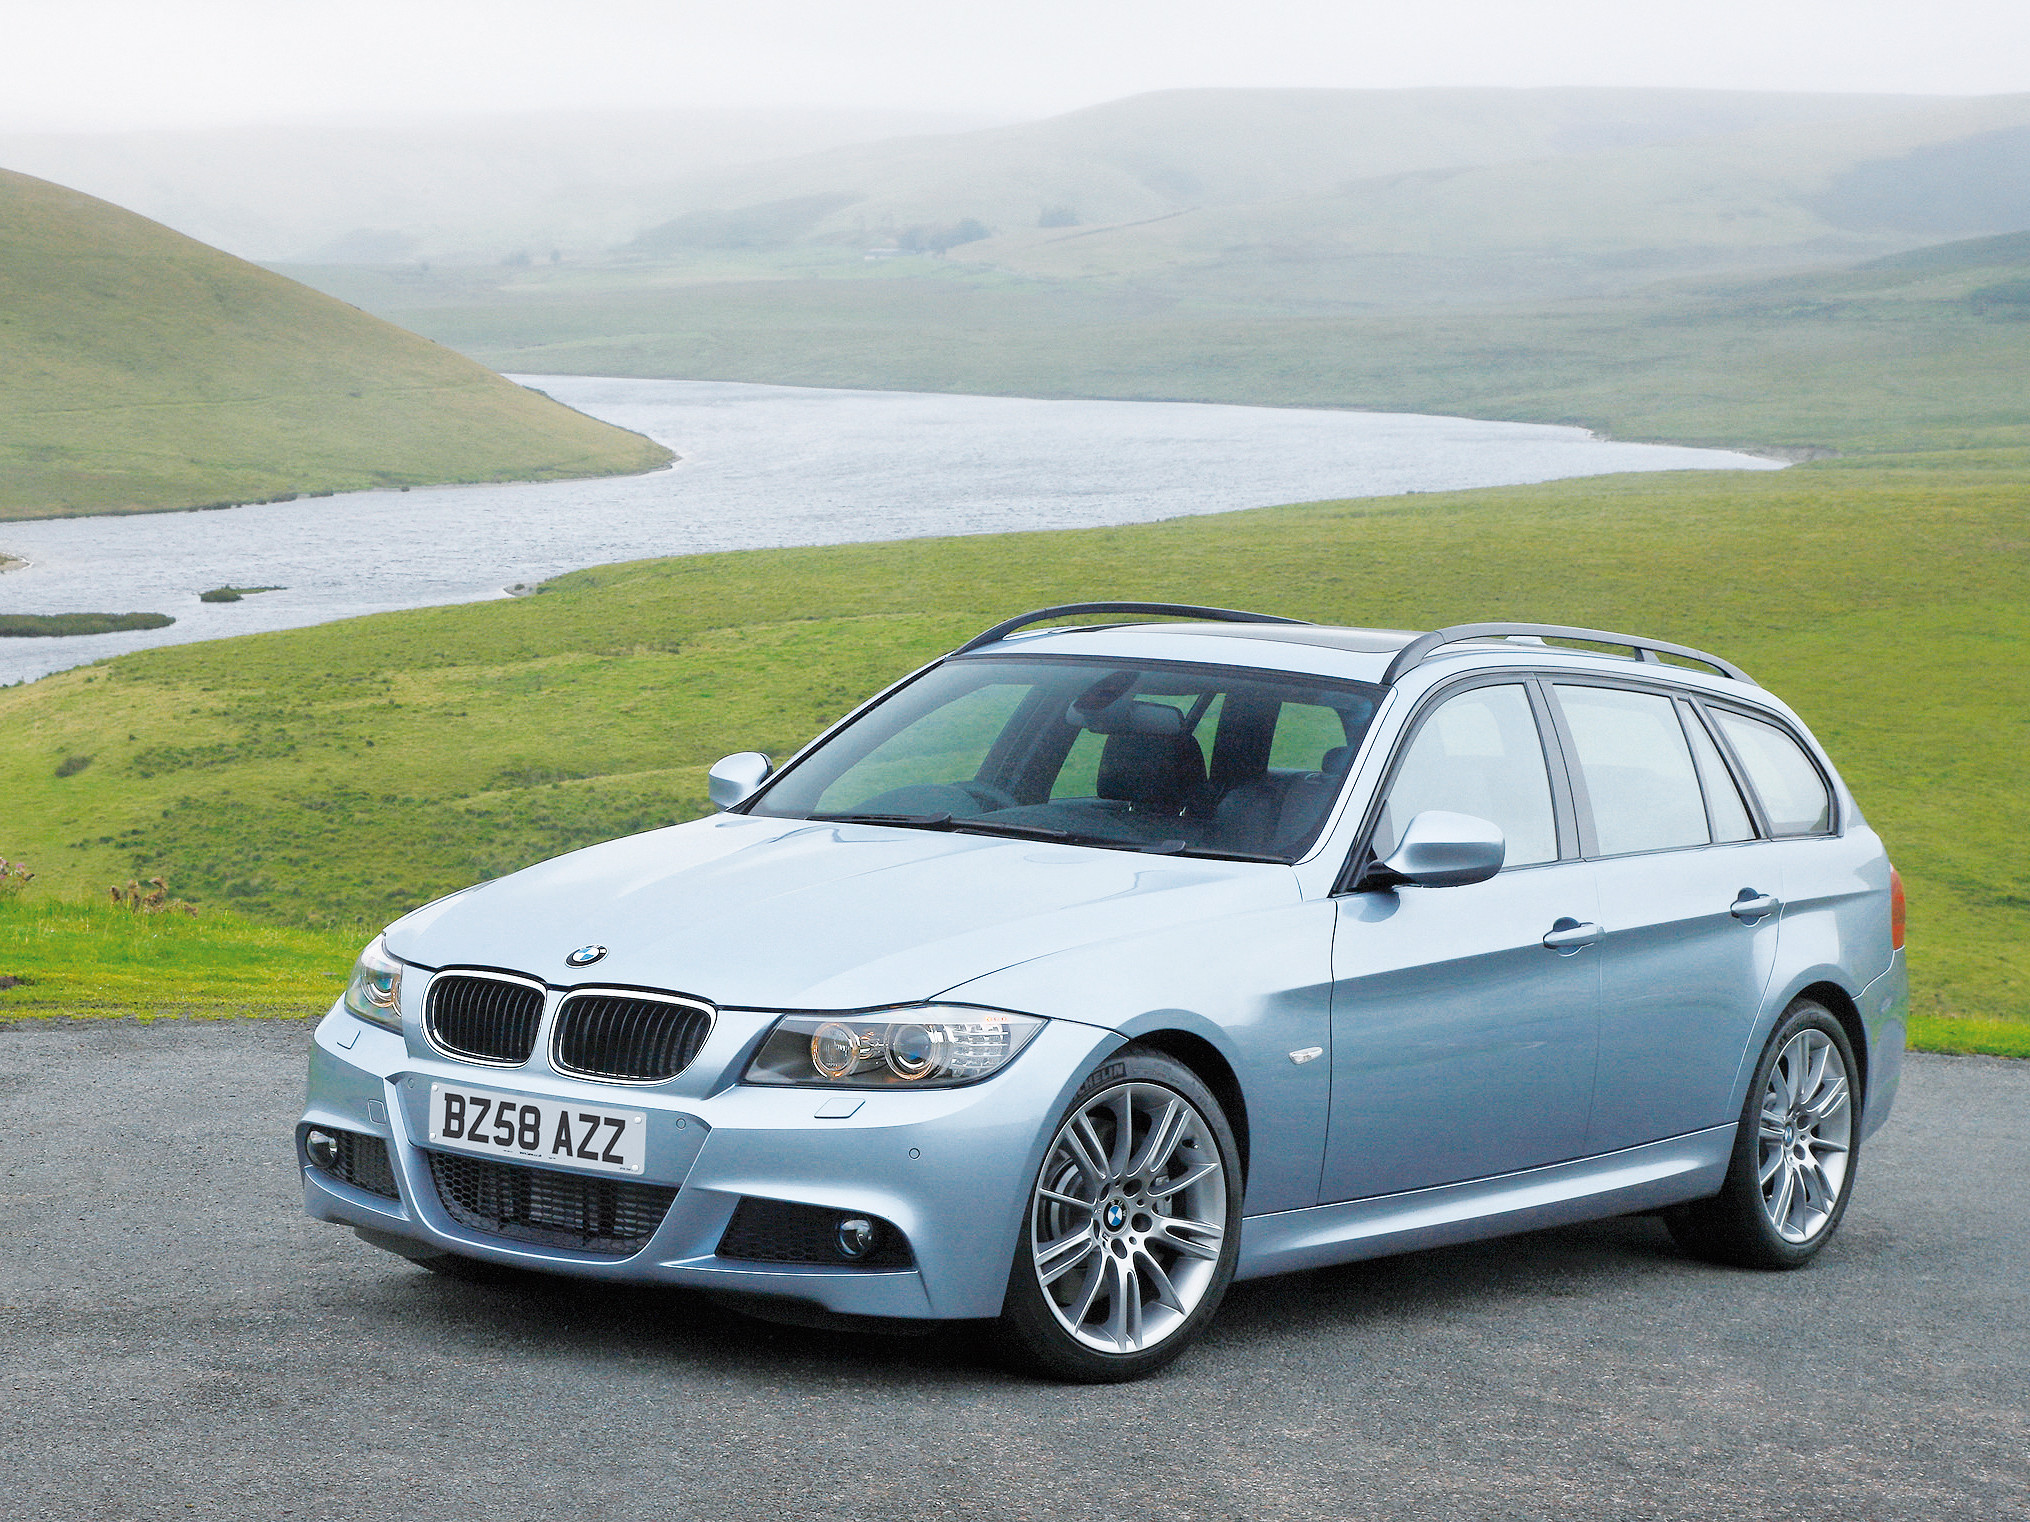 Used BMW (E91) Touring buyer's guide - Caravan